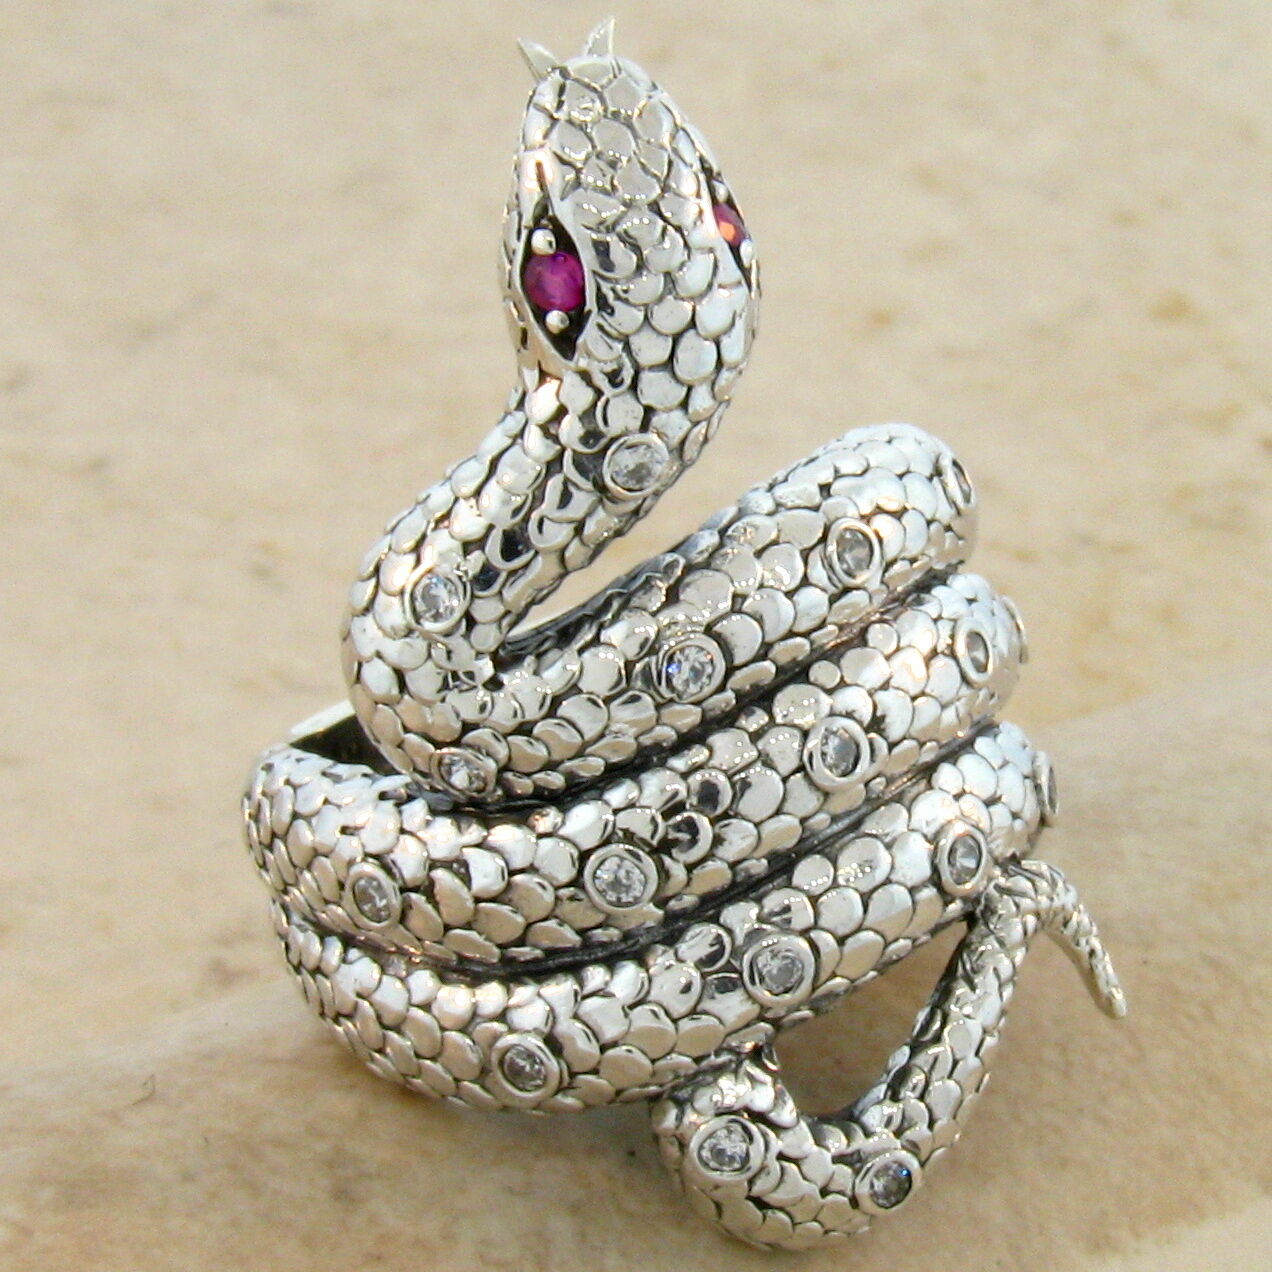 GENUINE RUBY ANTIQUE VICTORIAN DESIGN 925 STERLING SILVER SNAKE RING SZ 10, #221